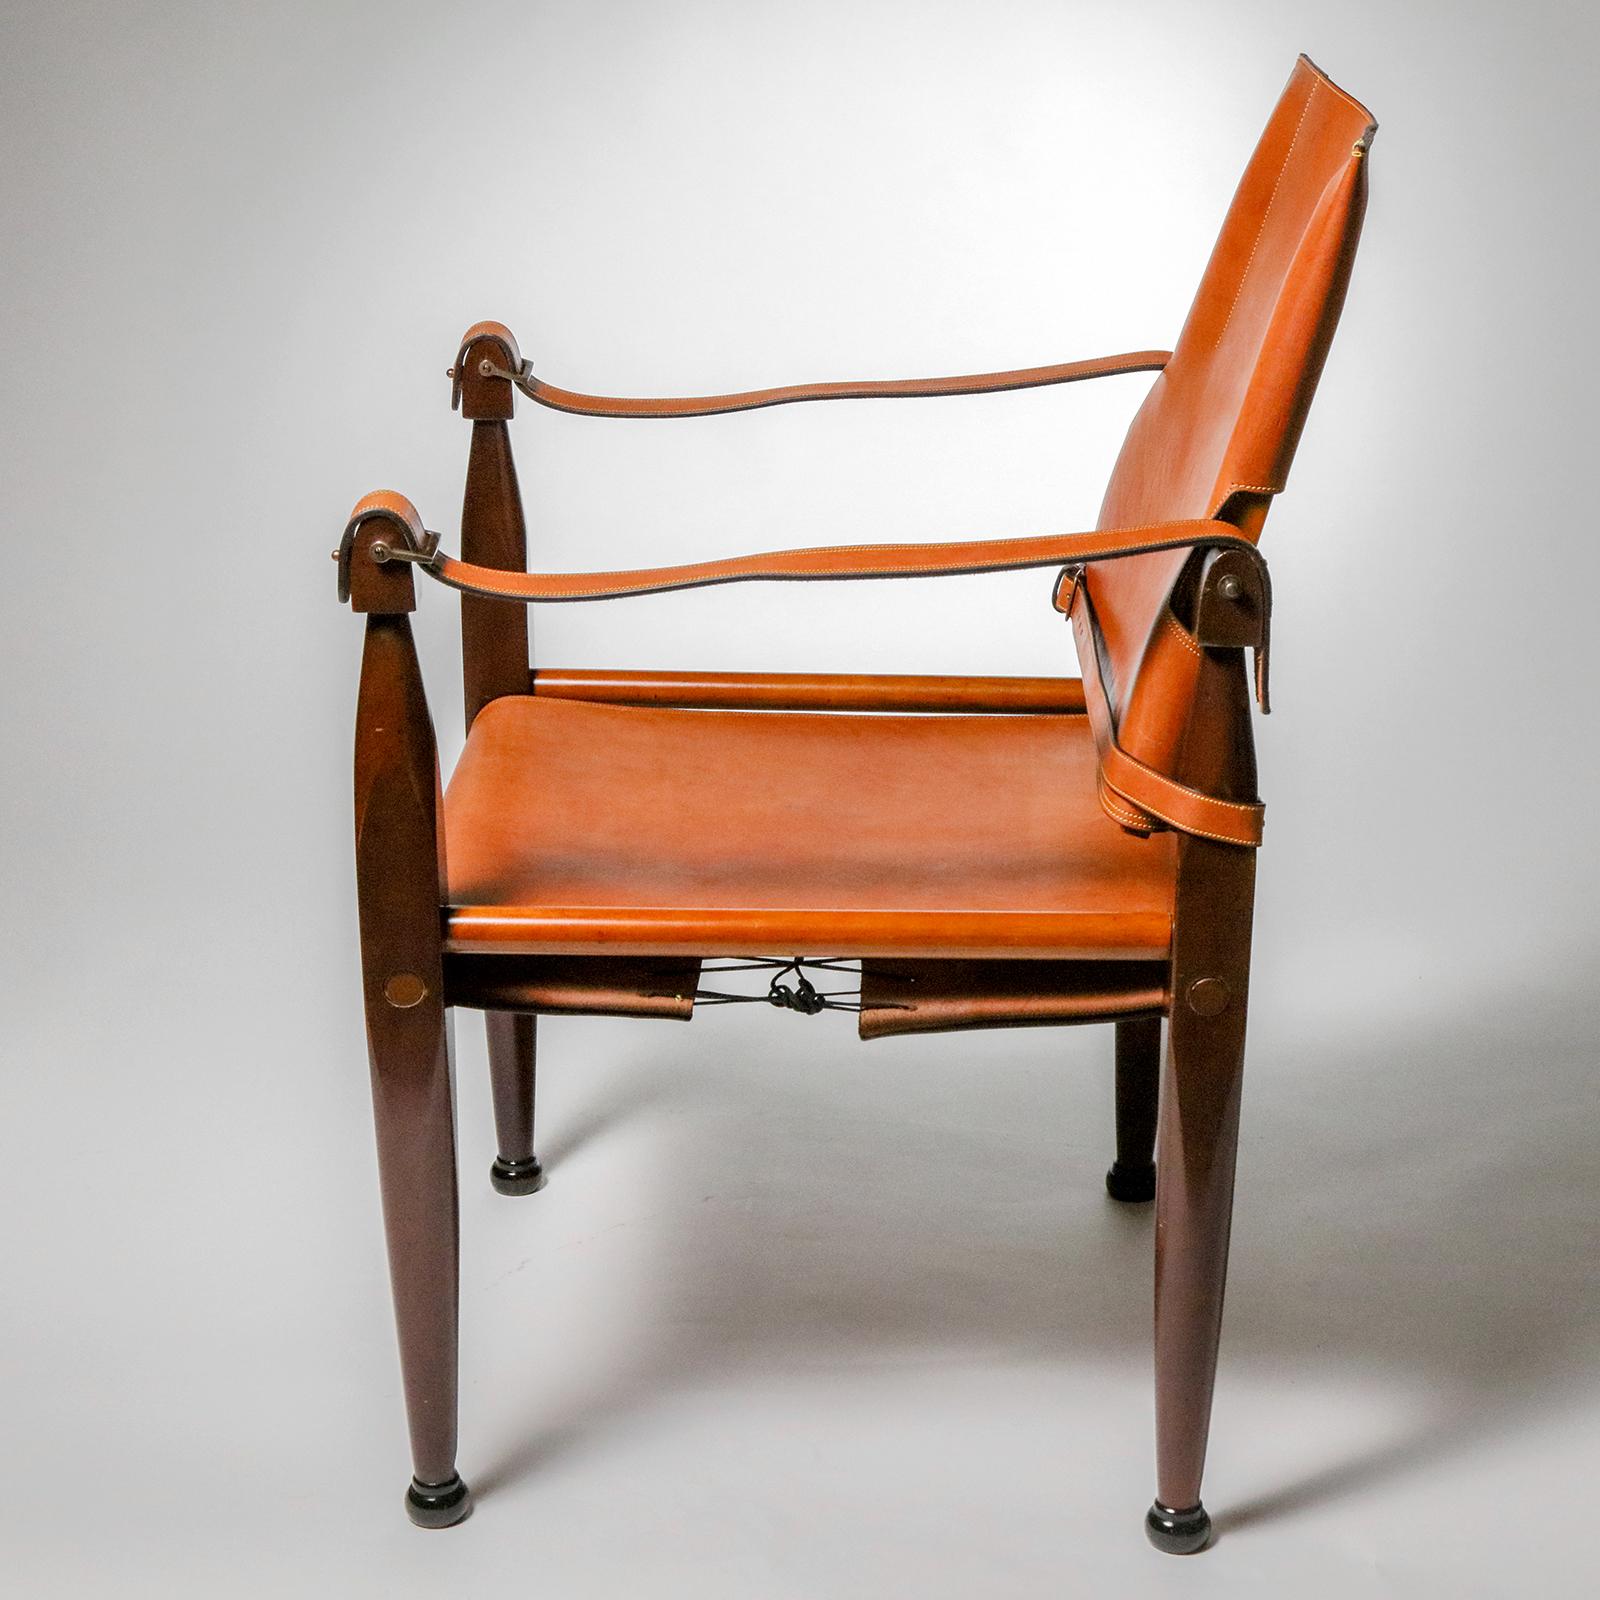 A distinctive cognac-colored leather accent chair, so-called because of the stitched bridle strap arms and leather buckle detailing that recalls the famous Spanish cowboys (gauchos). Dark maple wood frame in distressed finish completes the look.